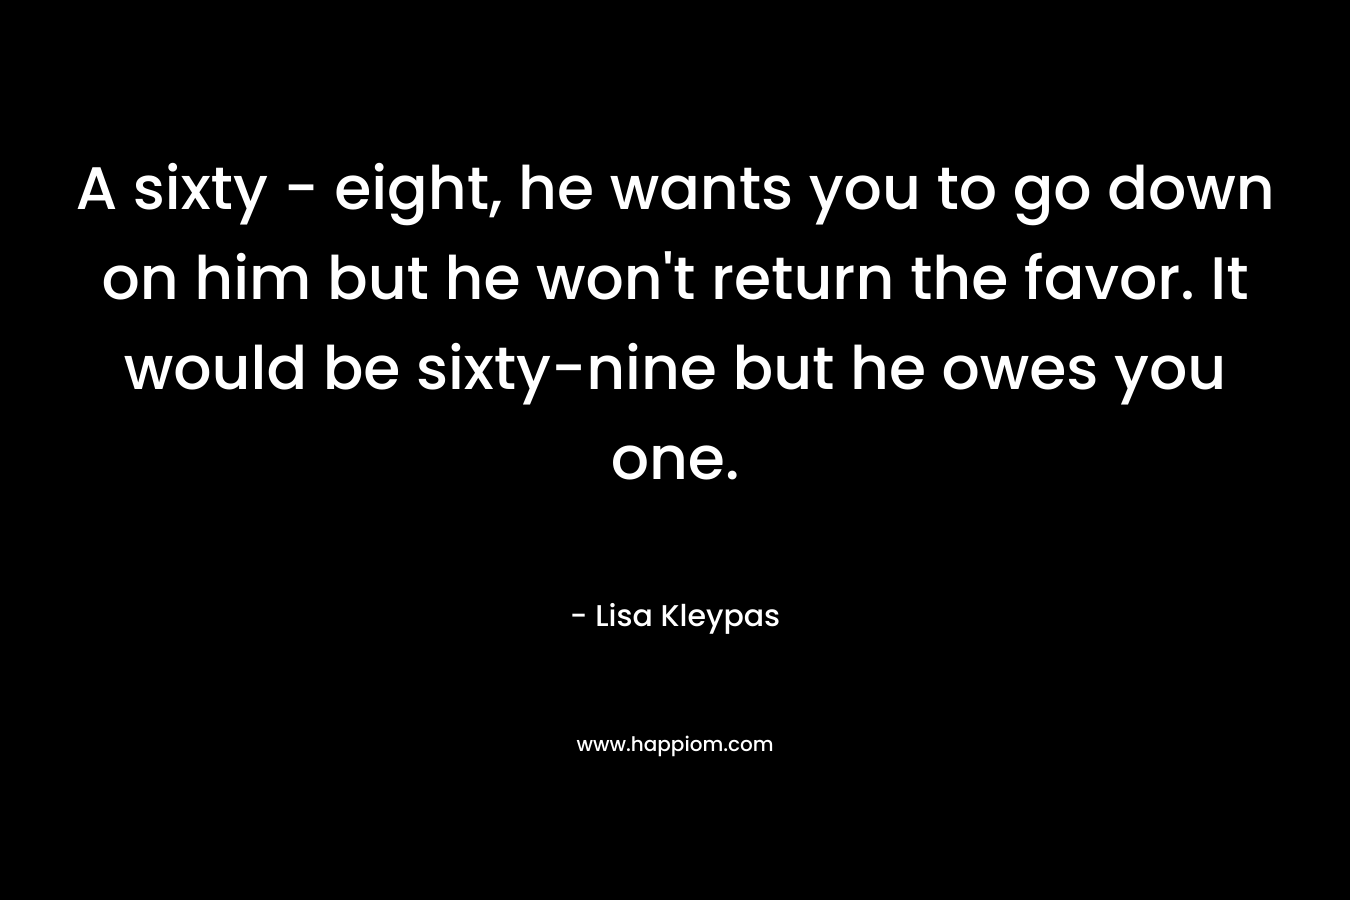 A sixty – eight, he wants you to go down on him but he won’t return the favor. It would be sixty-nine but he owes you one. – Lisa Kleypas